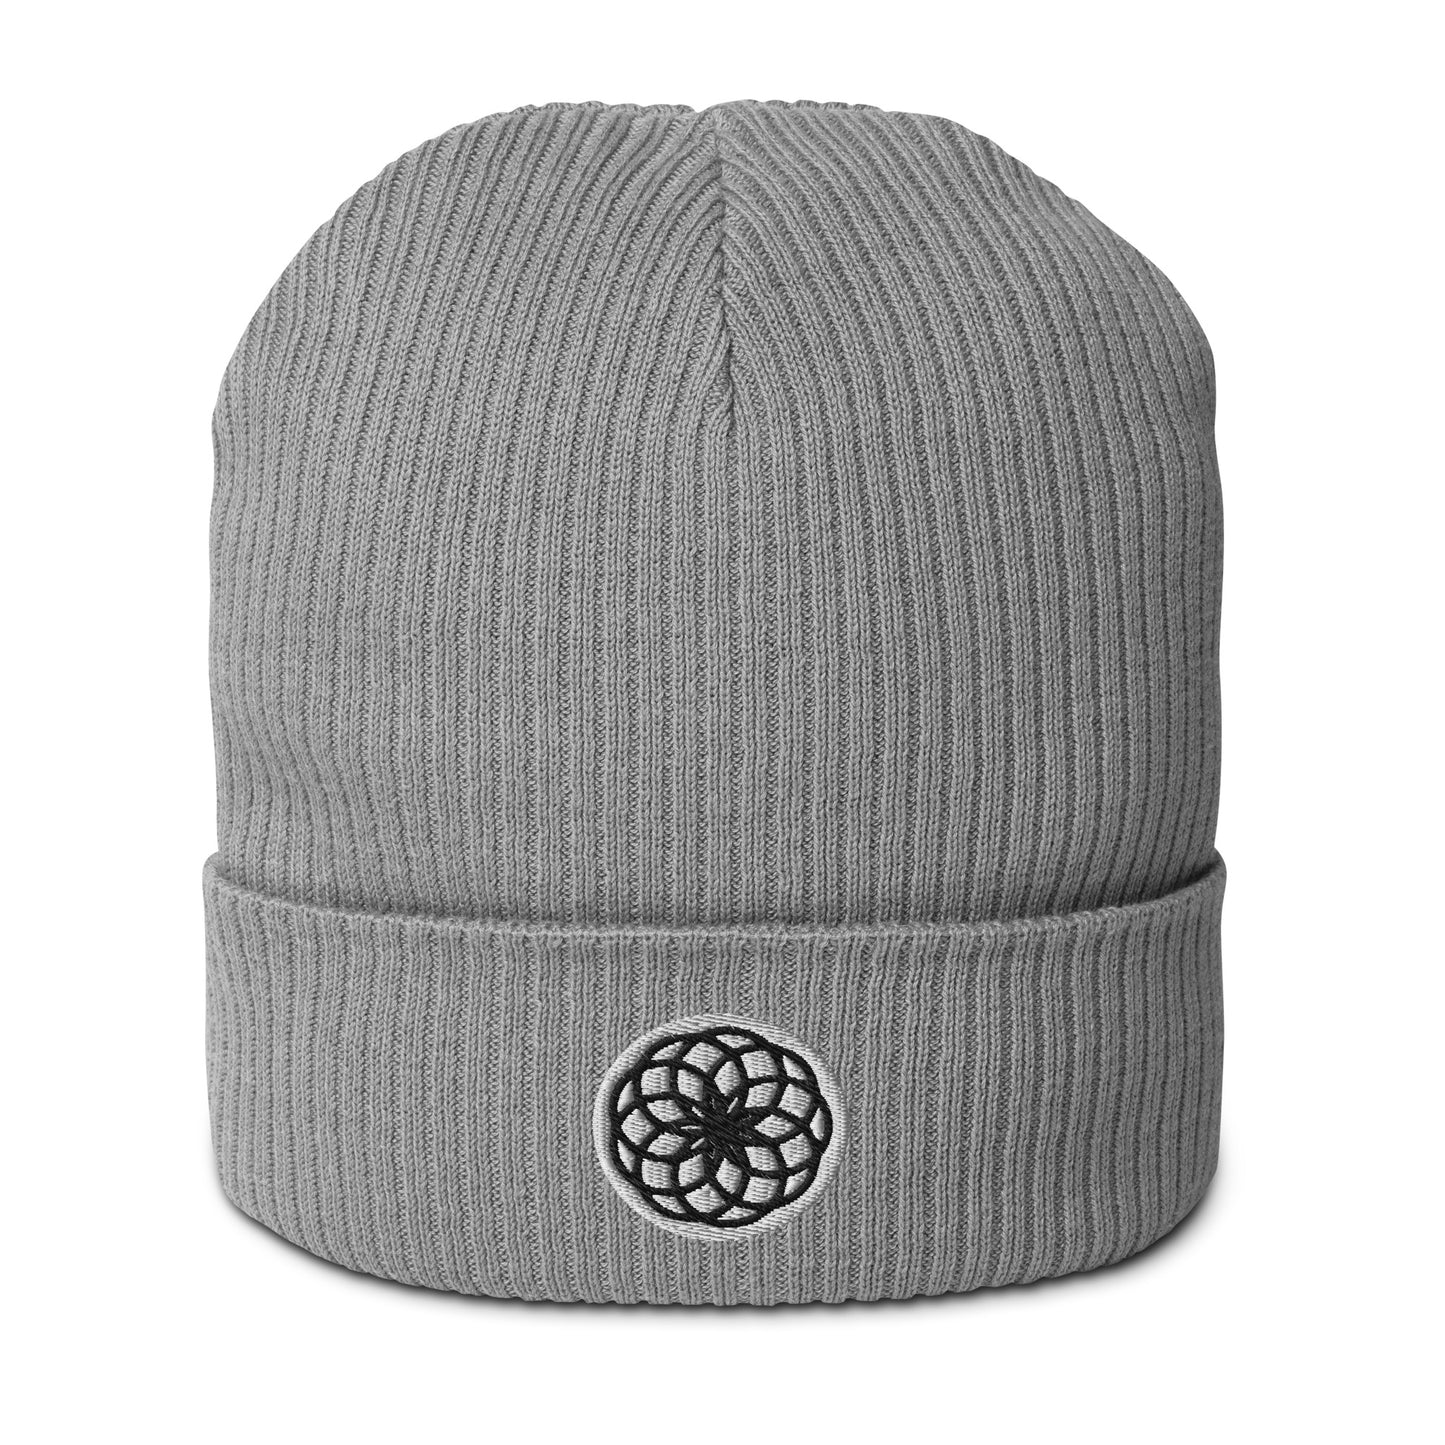 Check out our Organic Cotton Lotus of Life Beanie in Cloudy Gray. Made from organic cotton and featuring a Lotus of Life embroidery, it's not your average hat. It's about purity, growth, and embracing life. Plus, it's made of breathable and lightweight natural fabric, so you can stay comfy wherever your journey takes you. Grab one and add a laid-back, high vibe touch to your style.